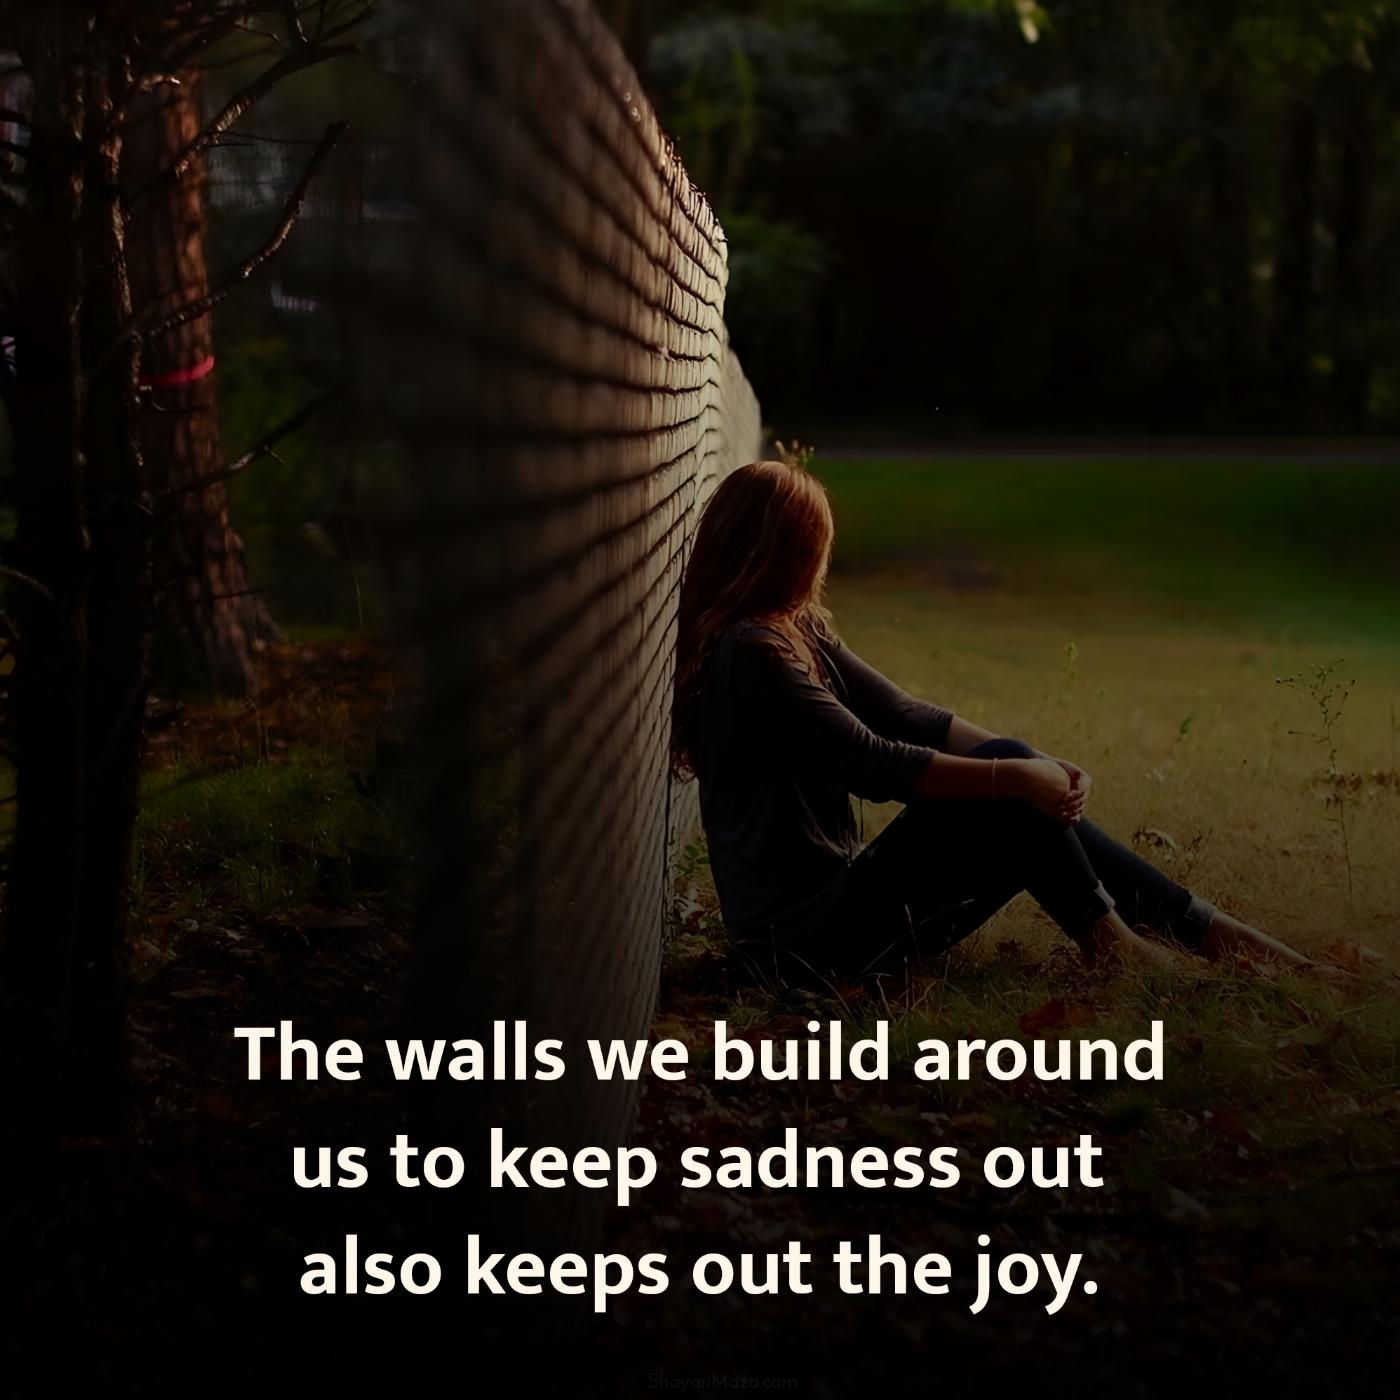 The walls we build around us to keep sadness out